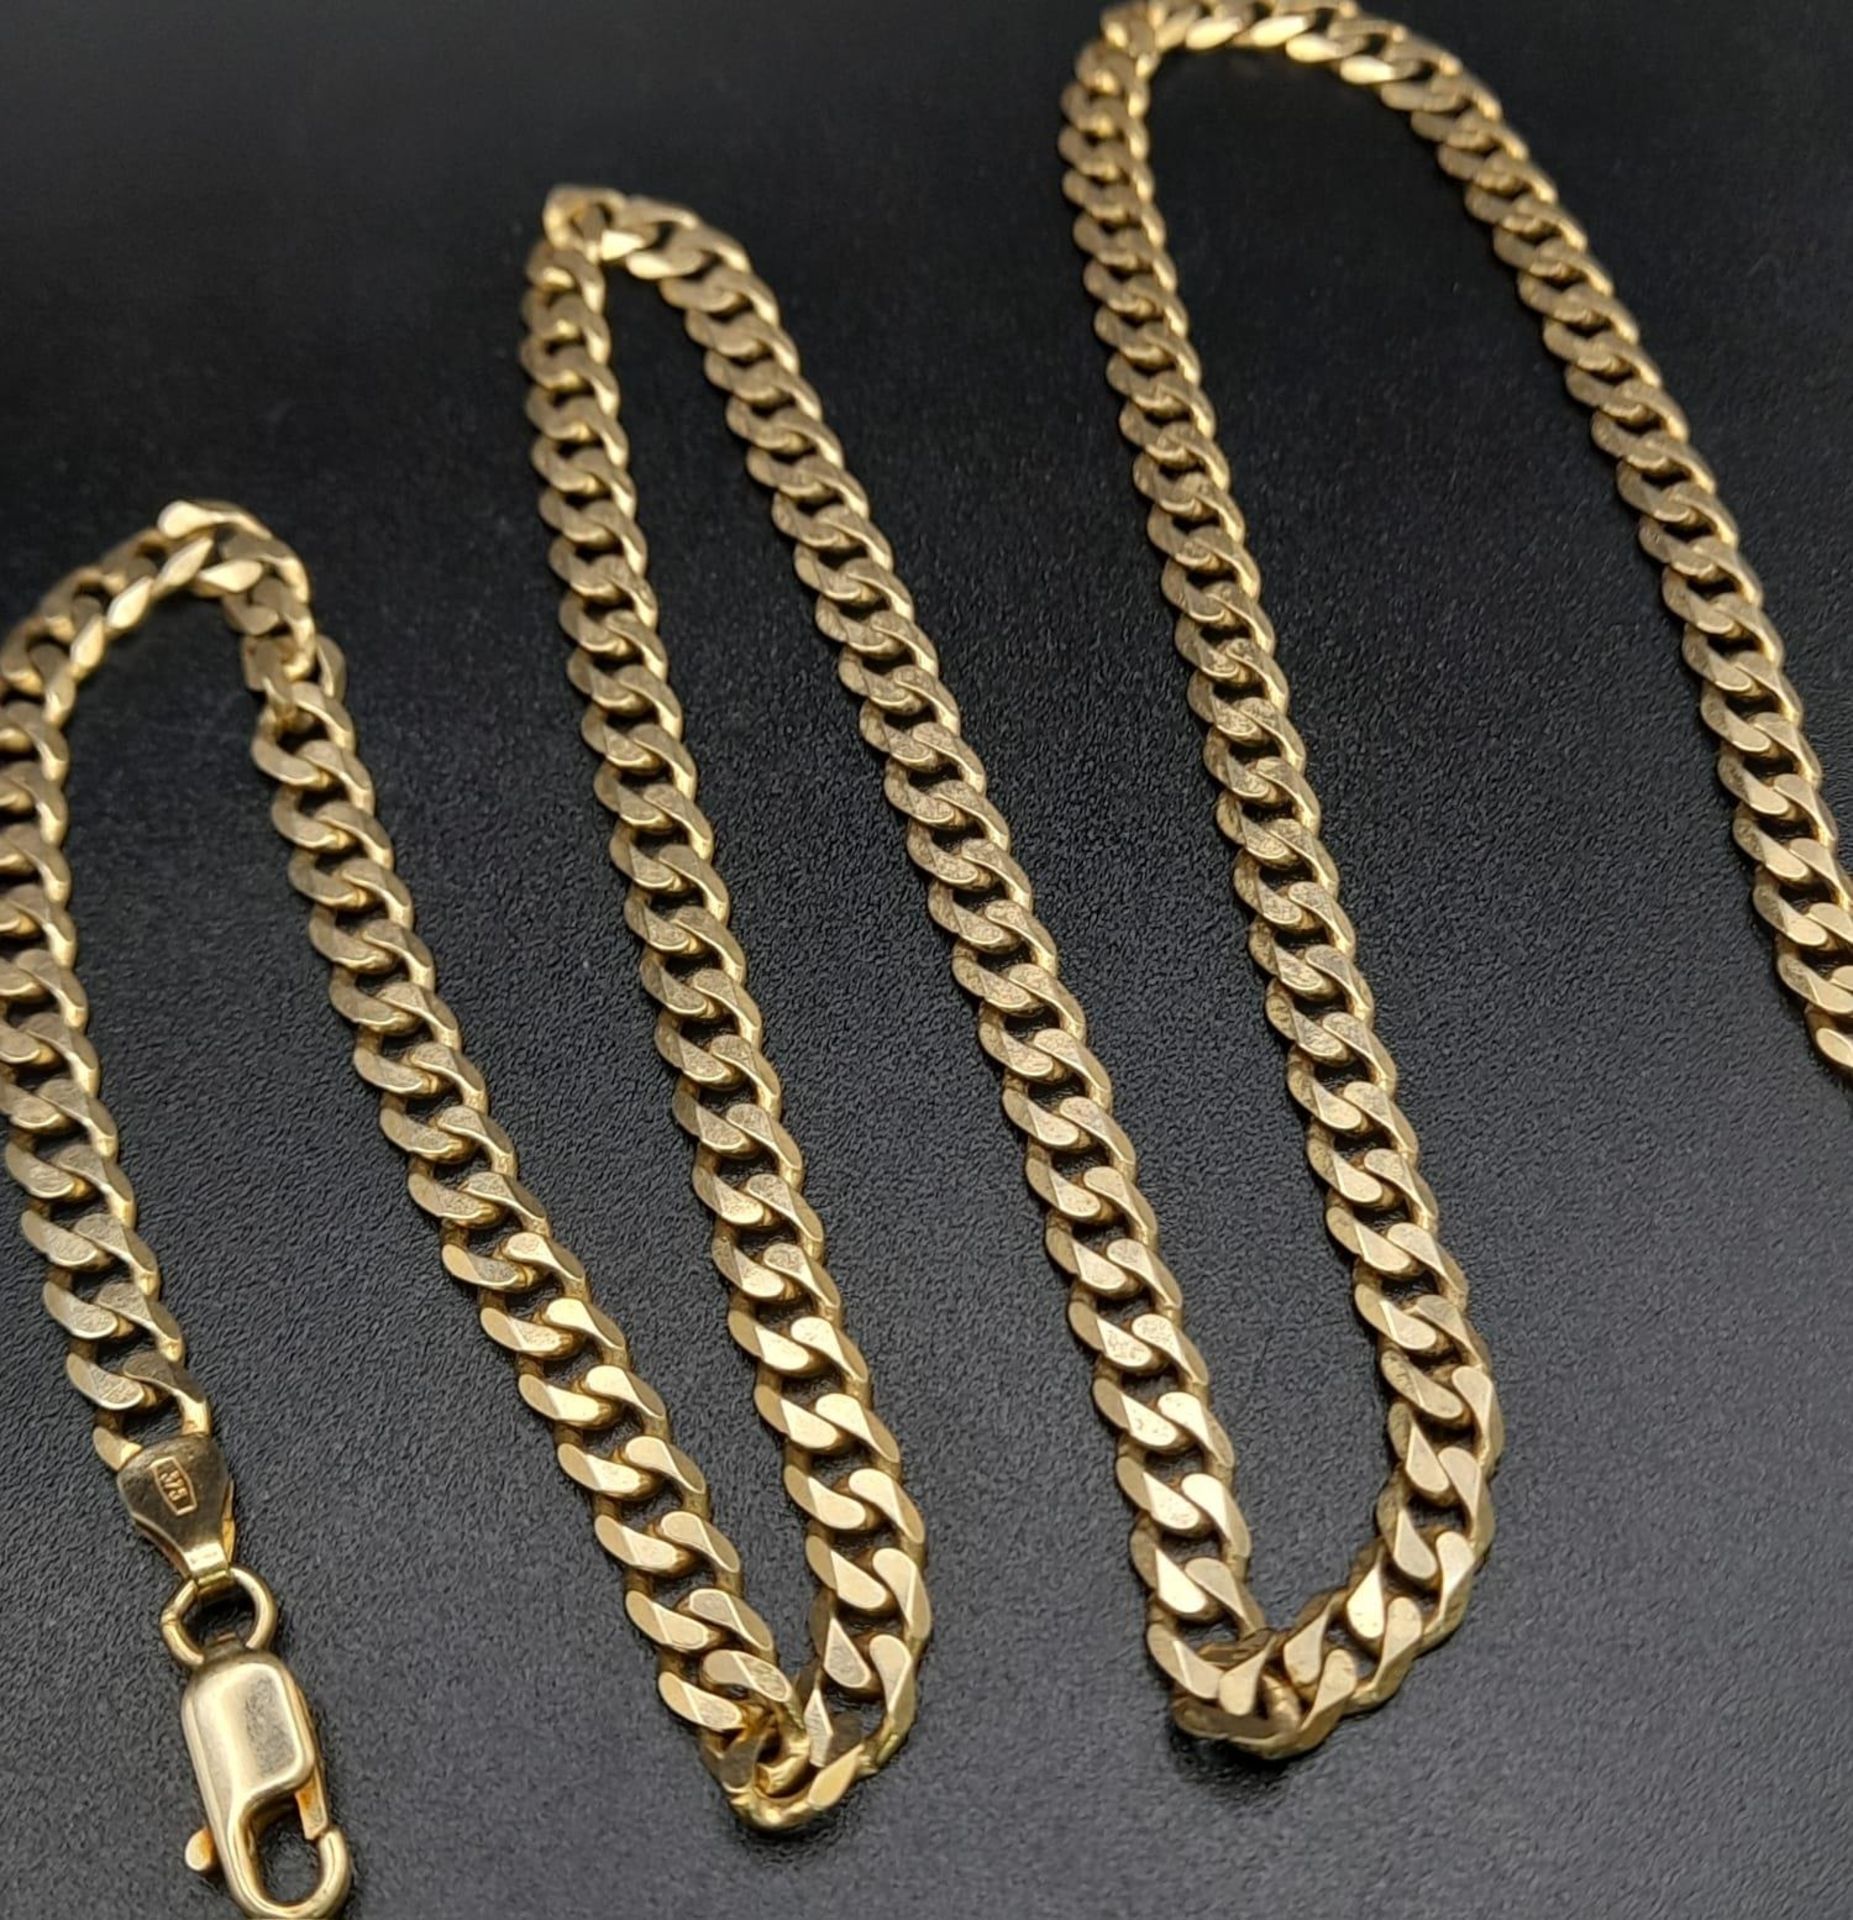 A 48cms 9K GOLD MIAMI CUBAN LINK CHAIN ..16gms - Image 3 of 4